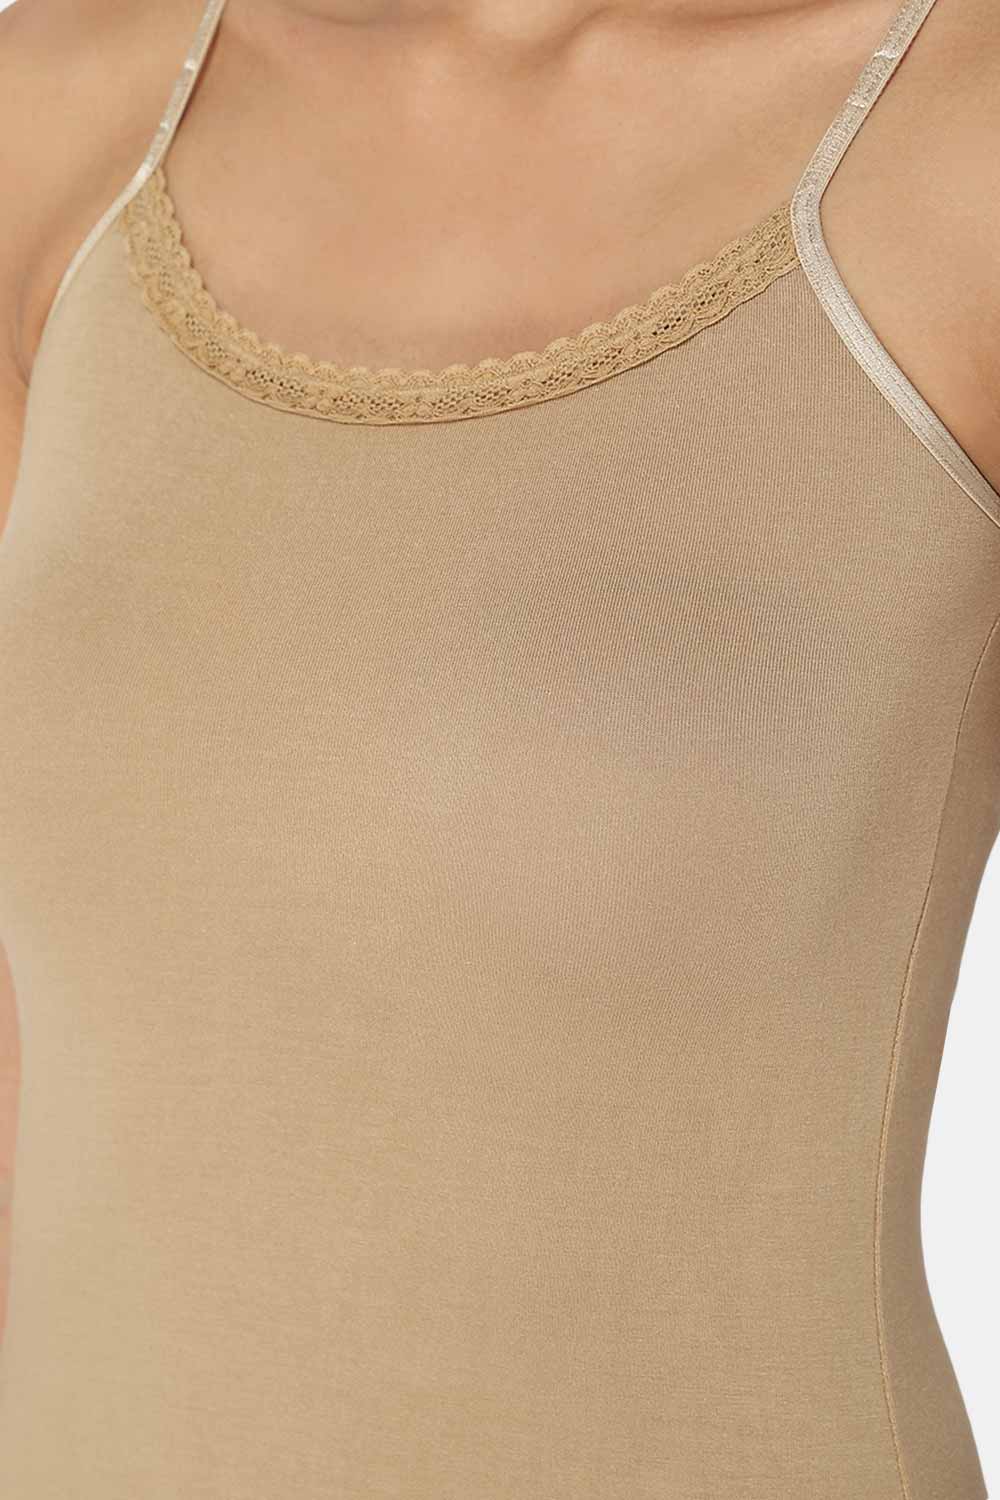 Intimacy Super Stretch Camisole Special Combo Pack - M001 - Pack of 2 - C01